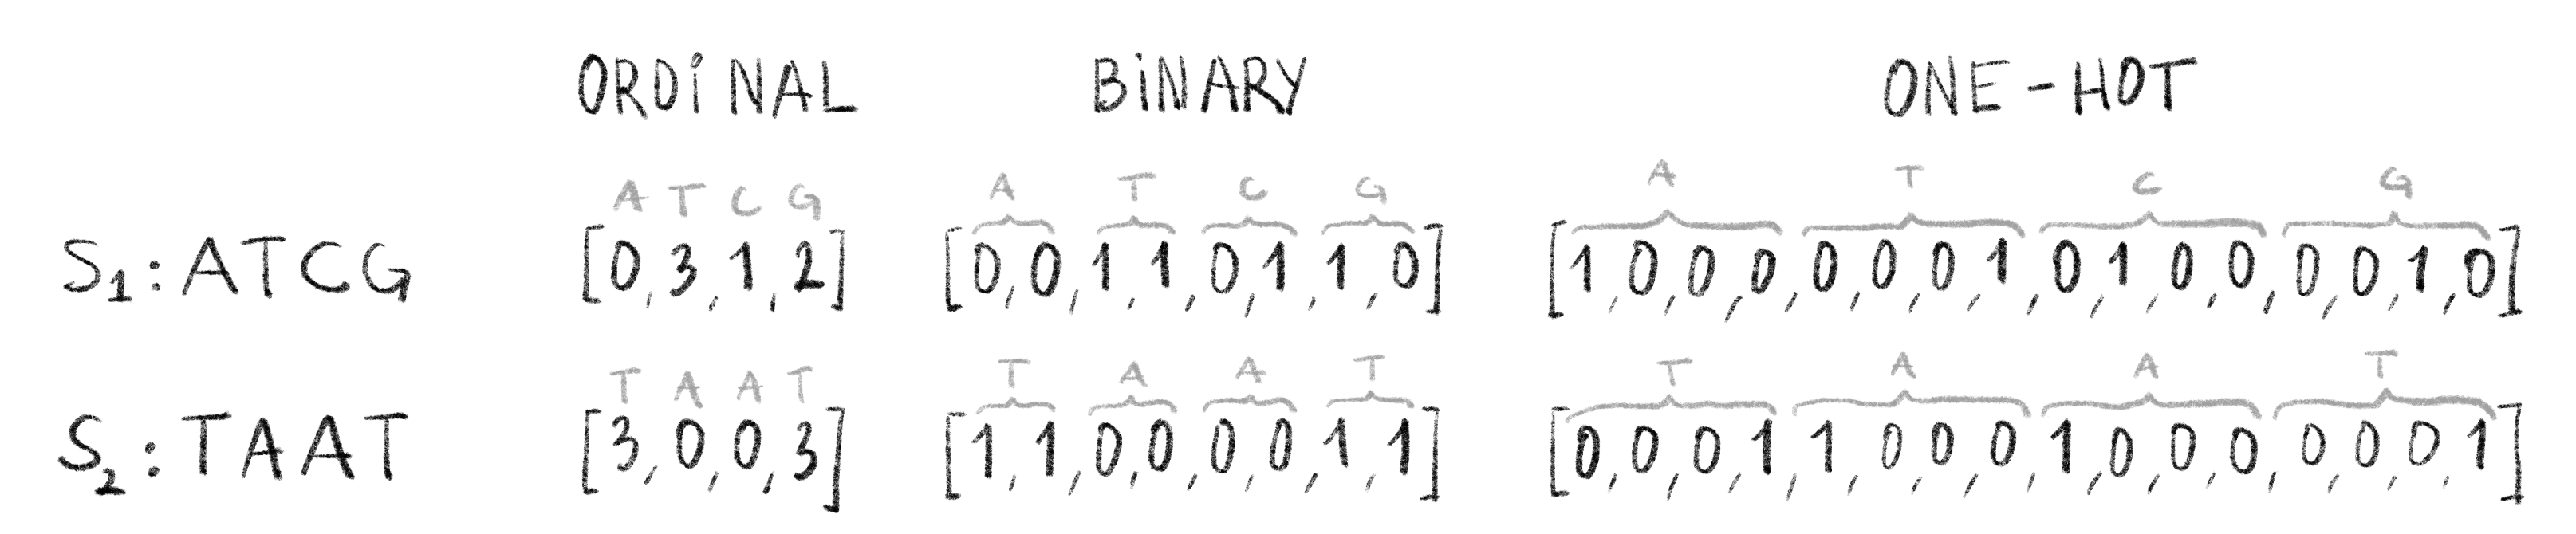 **Example of 3 general categorical encoding schemes.**  
Two sequences, `ATCG` and `TAAT` are shown encoded in three different encoding schemes: ordinal, binary and one-hot encoding. In the ordinal encoding, each character is assigned an integer value, here A=0, C=1, G=3 and T=4. In the binary encoding, these integer values are encoded with 2 bits. In the one-hot encoding scheme, a character corresponds to a sparse vector indicating which level of the variable is present: here A=[1,0,0,0]. Ordinal encoding preserves the dimension of the sequence while binary and one-hot encoding result in vectors with a bigger dimension than the original sequence. 
